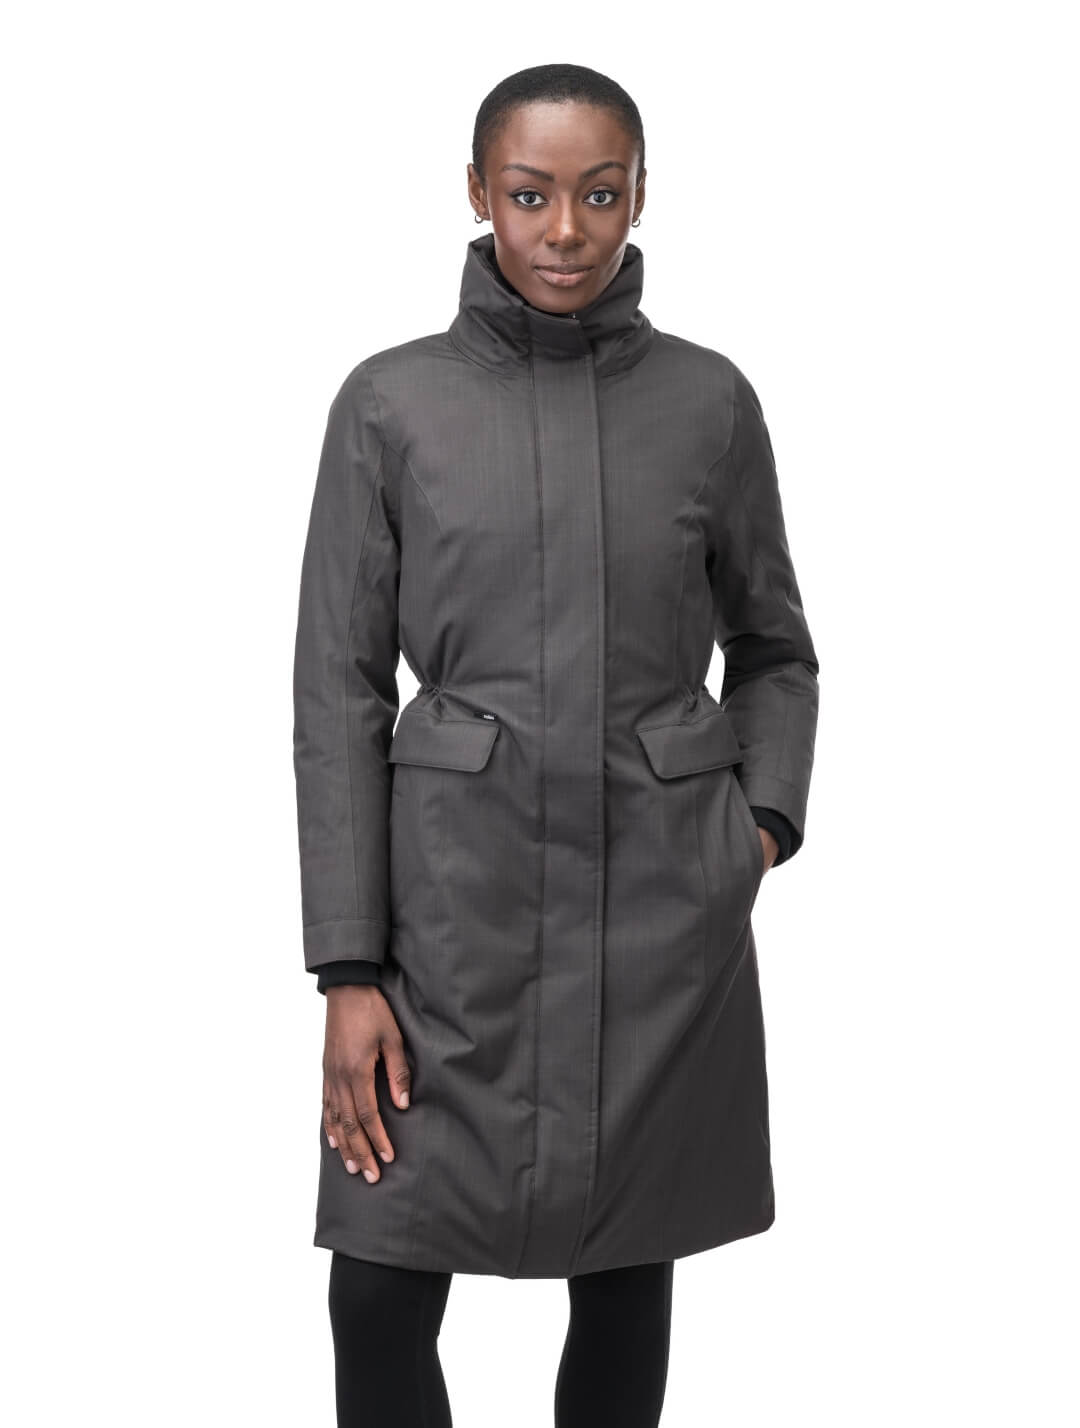 Zenith Ladies Knee Length Parka in knee length, Canadian duck down insulation, removable hood with removable fur ruff trim, and two-way front zipper, in Steel Grey